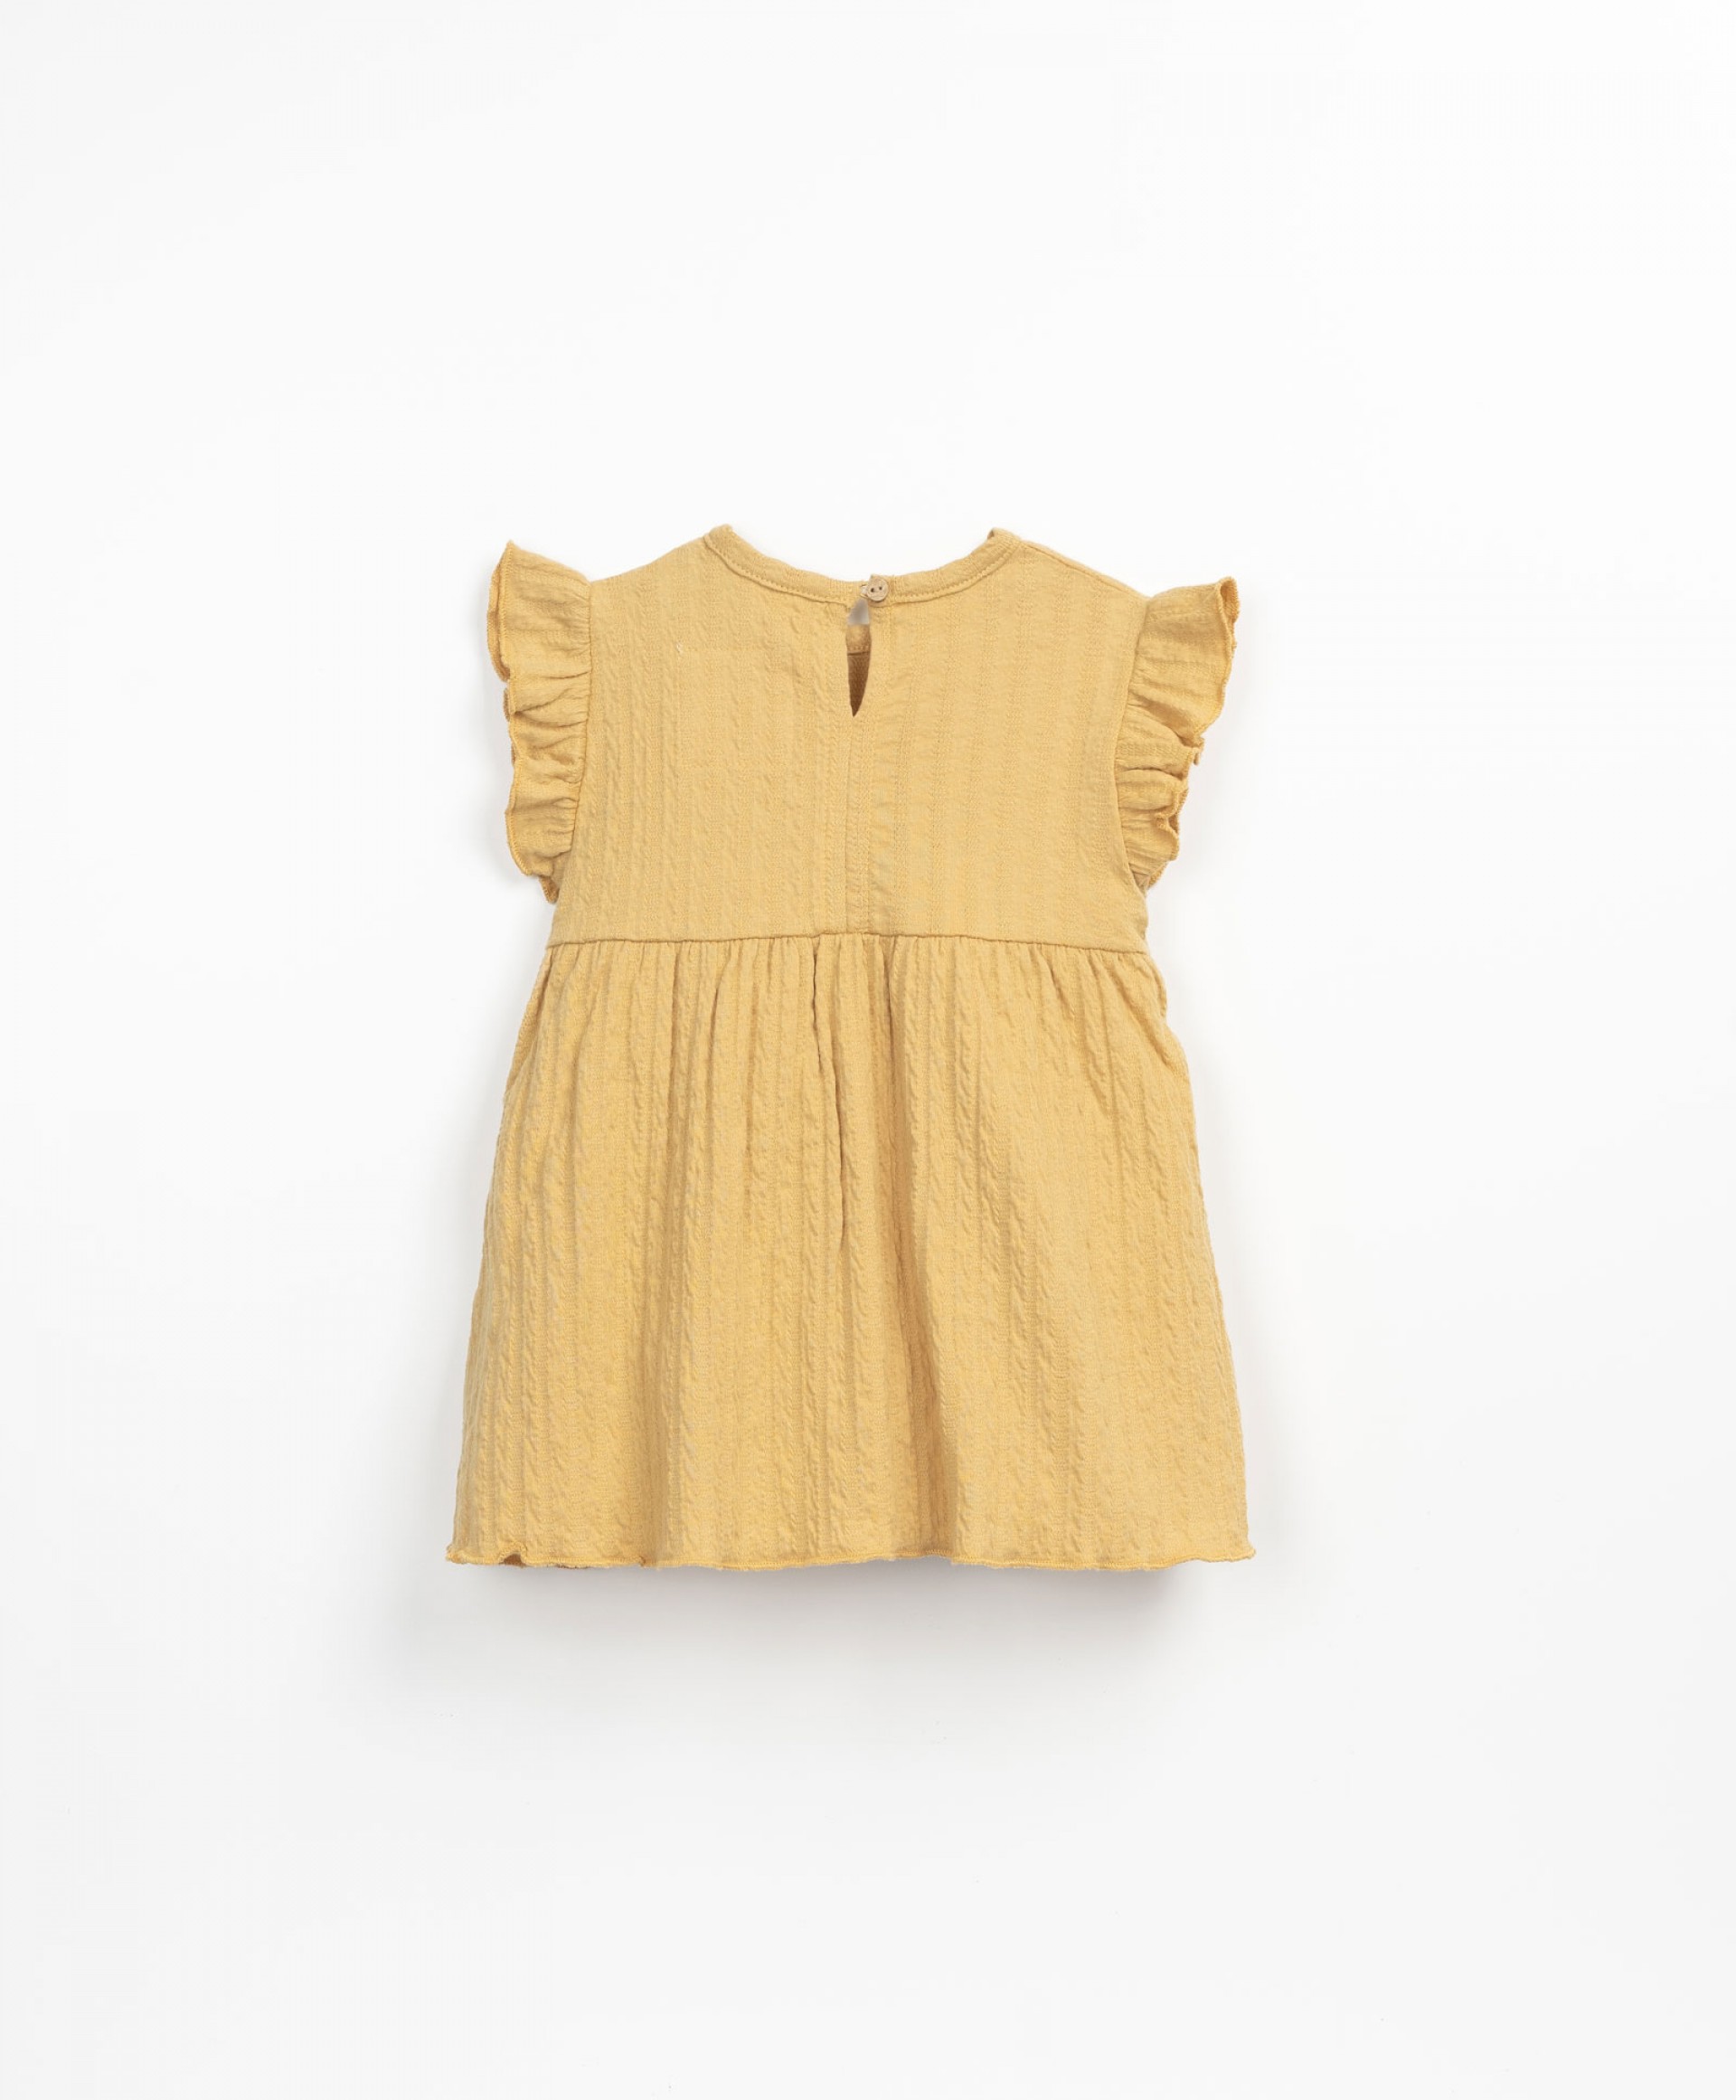 Dress with frill on the shoulders | Textile Art